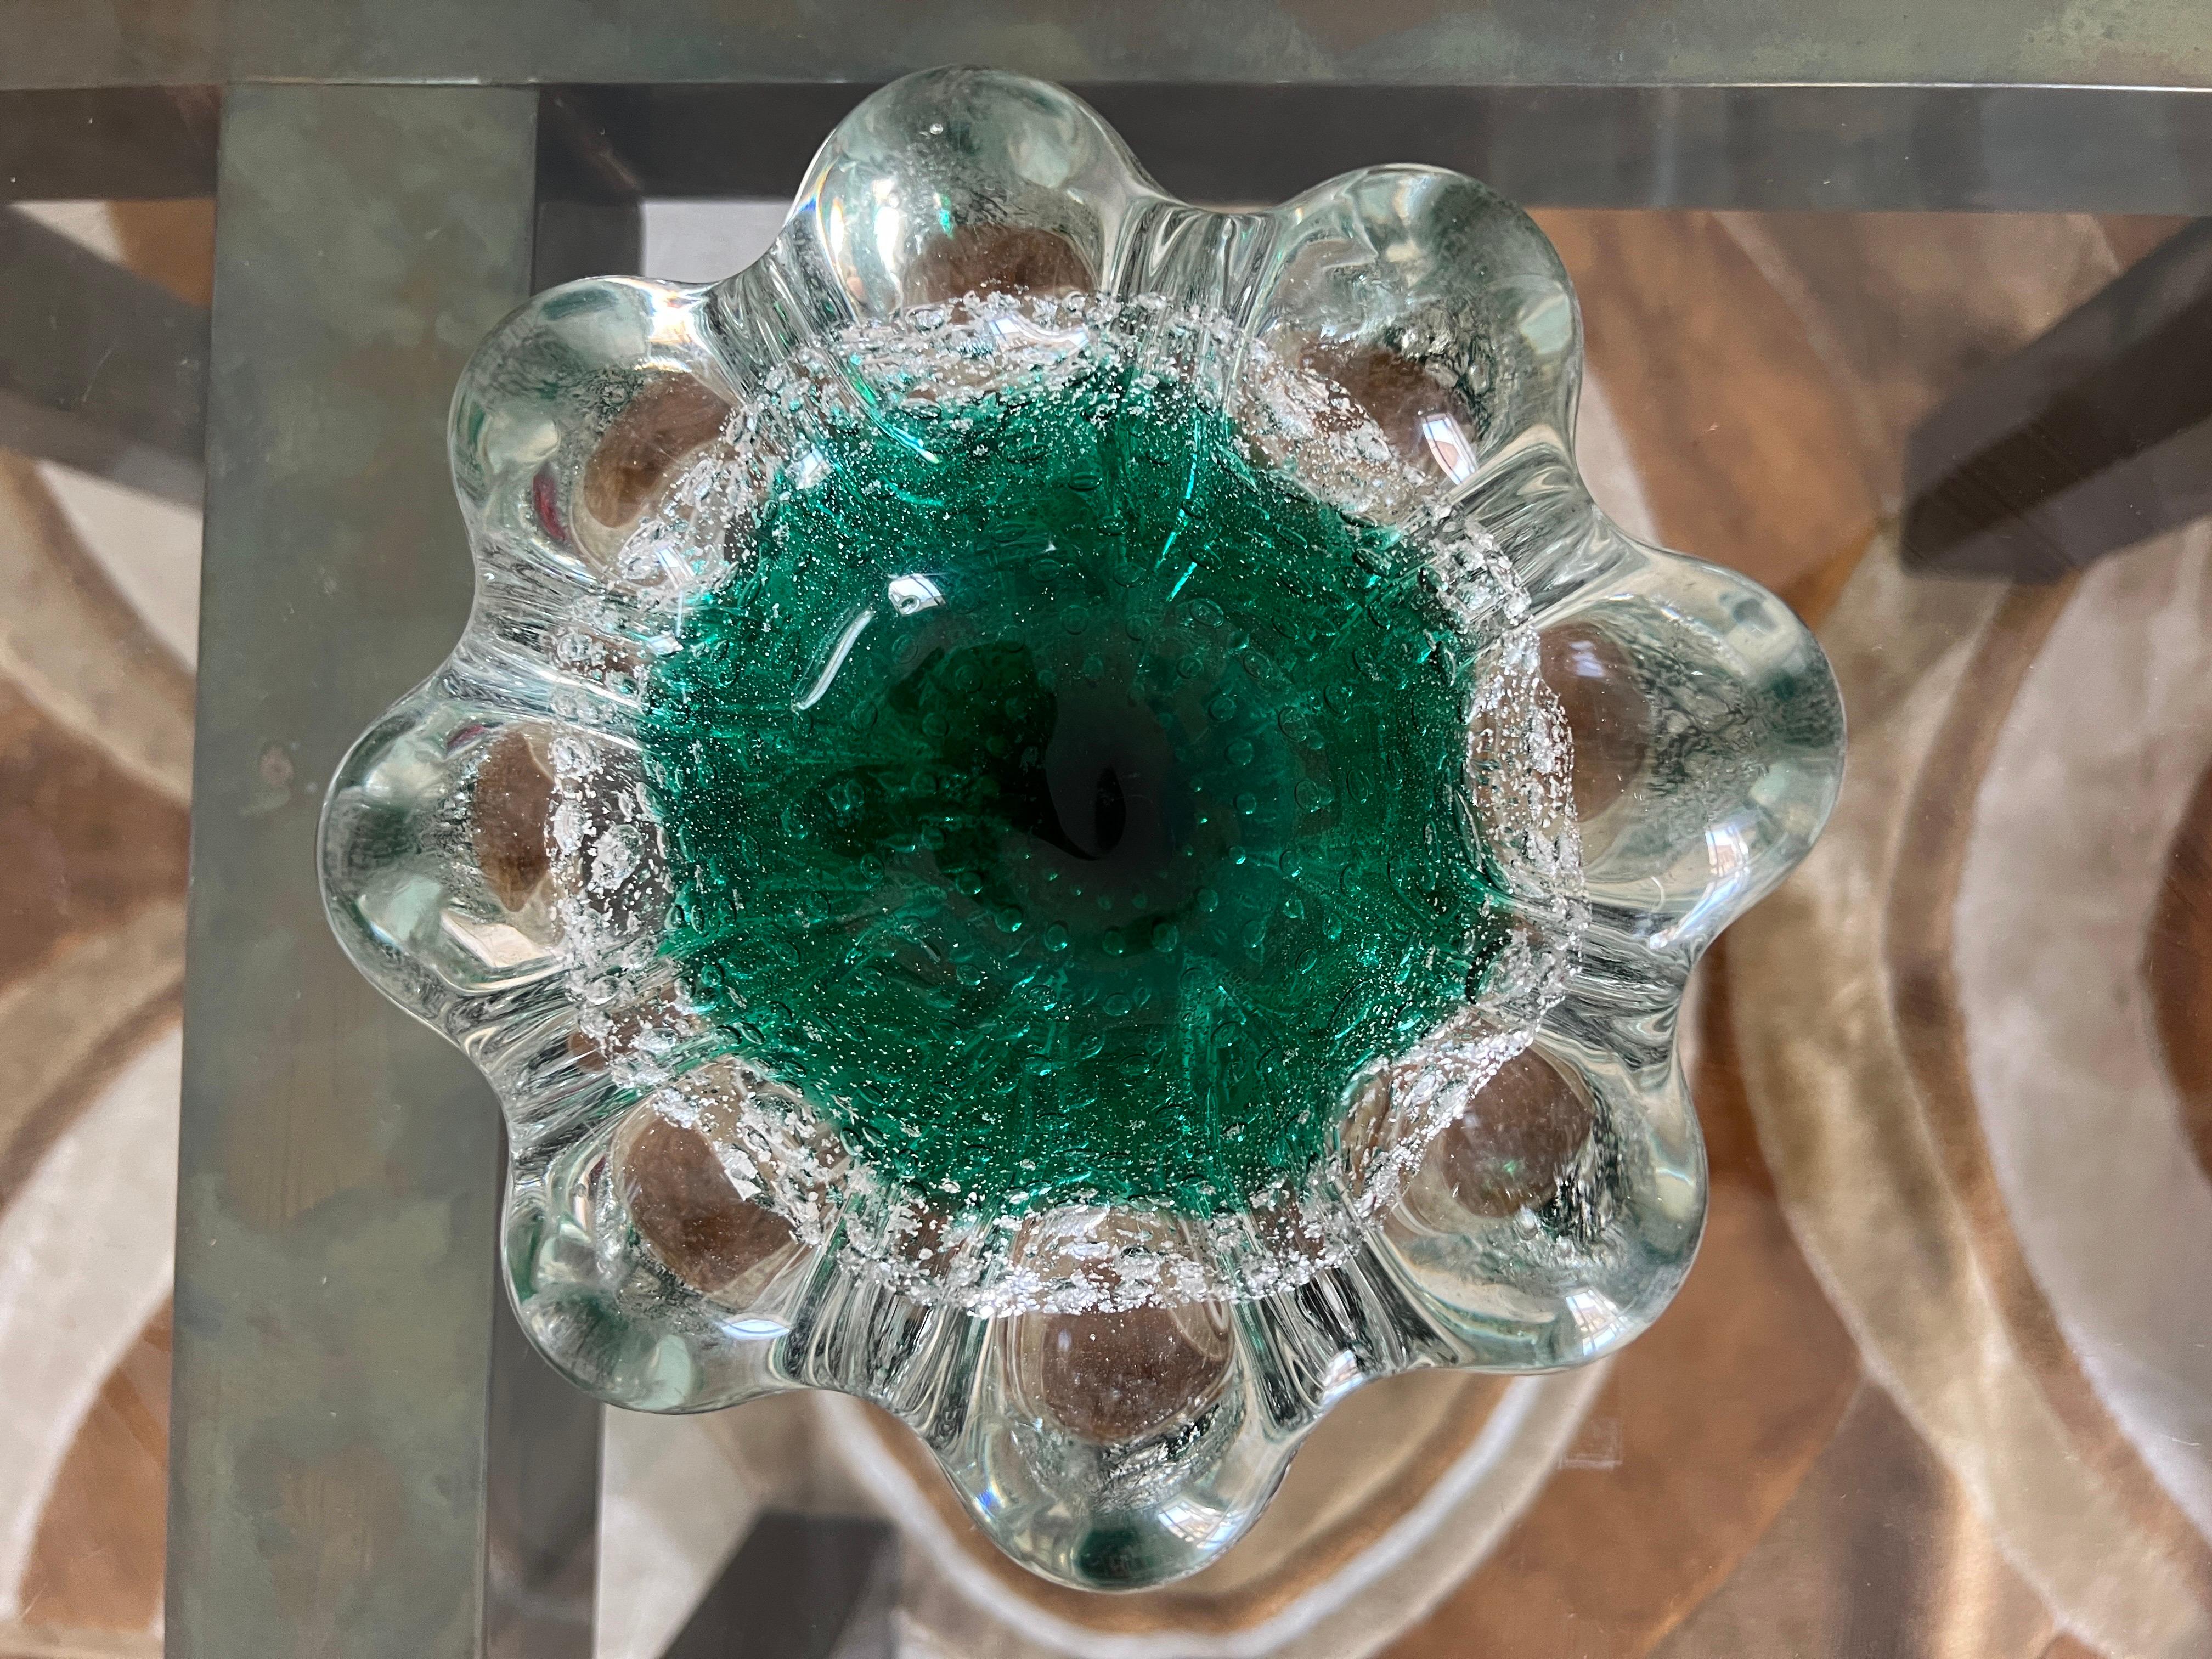 Presenting a stunning Murano glass piece by Seguso from the 1970s – a bowl or ashtray showcasing the renowned craftsmanship of the Seguso artisans. This exquisite piece features a blend of transparent to emerald green glass.. Within the glass,